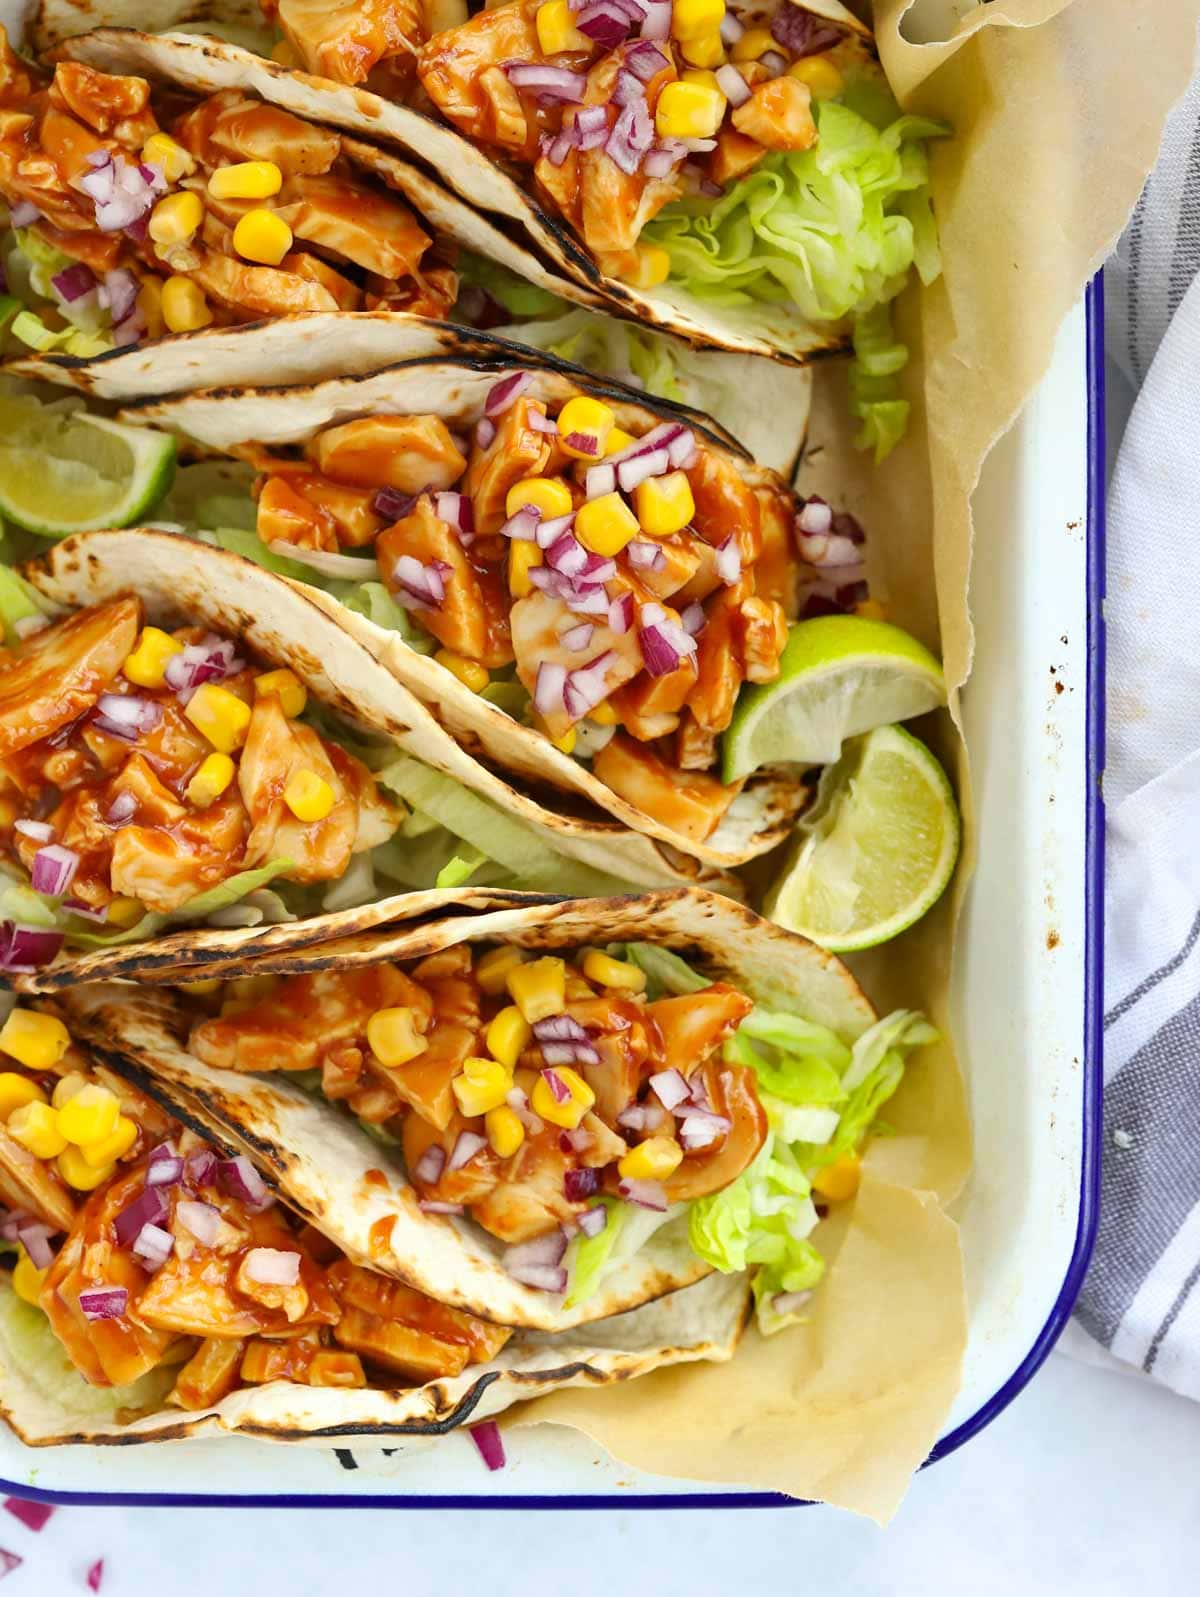 Oven tray with Chicken Tacos recipe